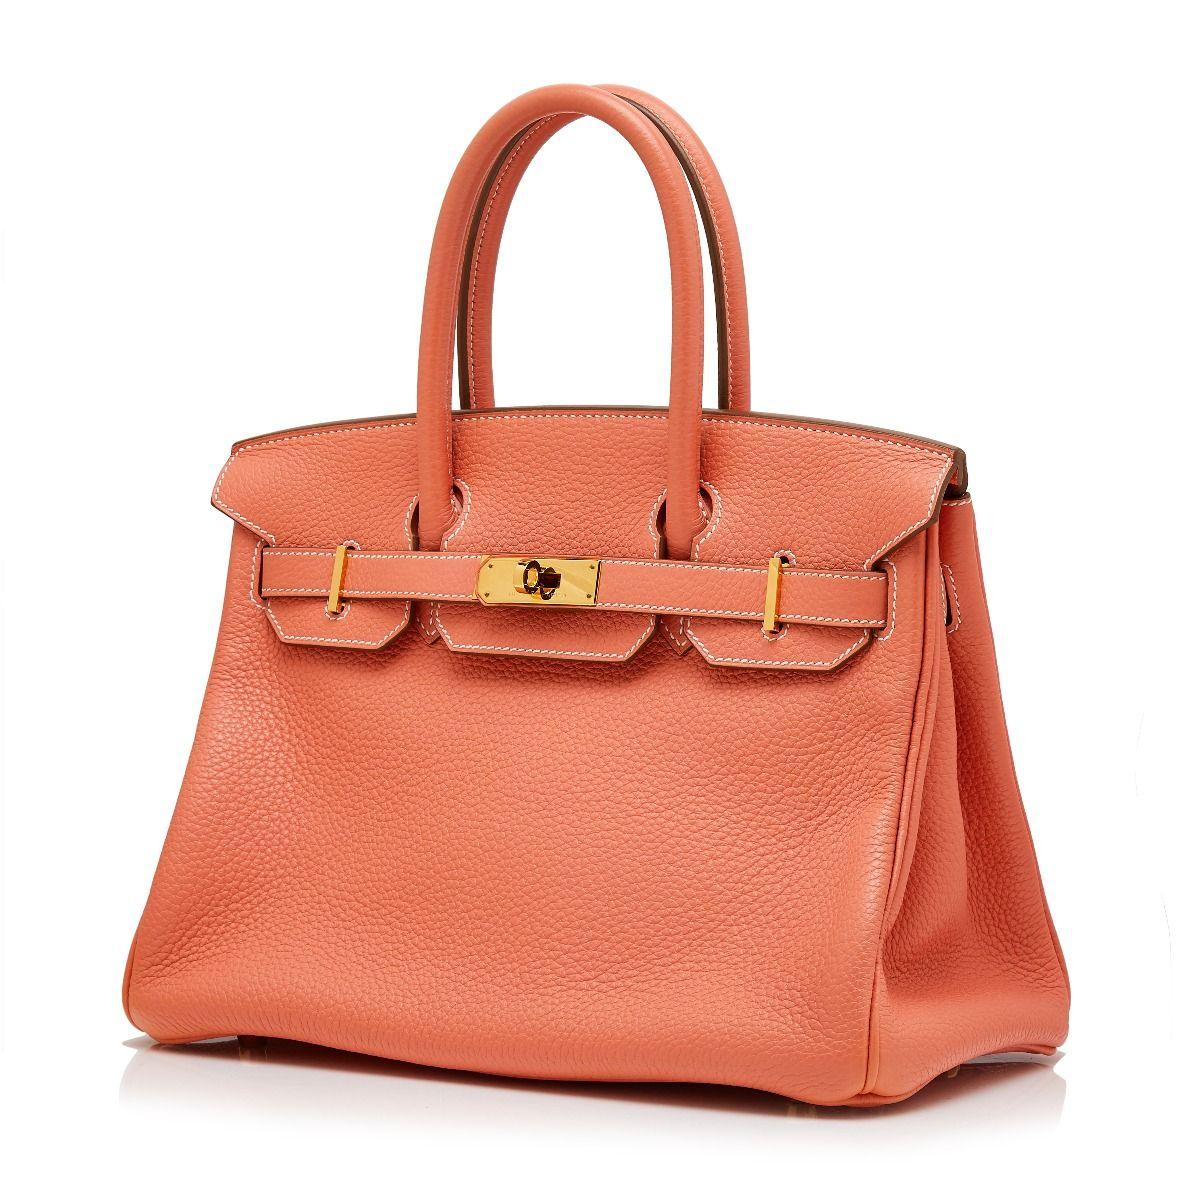 Adding a twist to the traditional Hermès Birkin, this truly spectacular, one-of-a-kind rarity combines a vivid crevette togo leather exterior with gold-tone metal accents, for an effect that is unexpectedly modern and fresh. Crafted in France, this